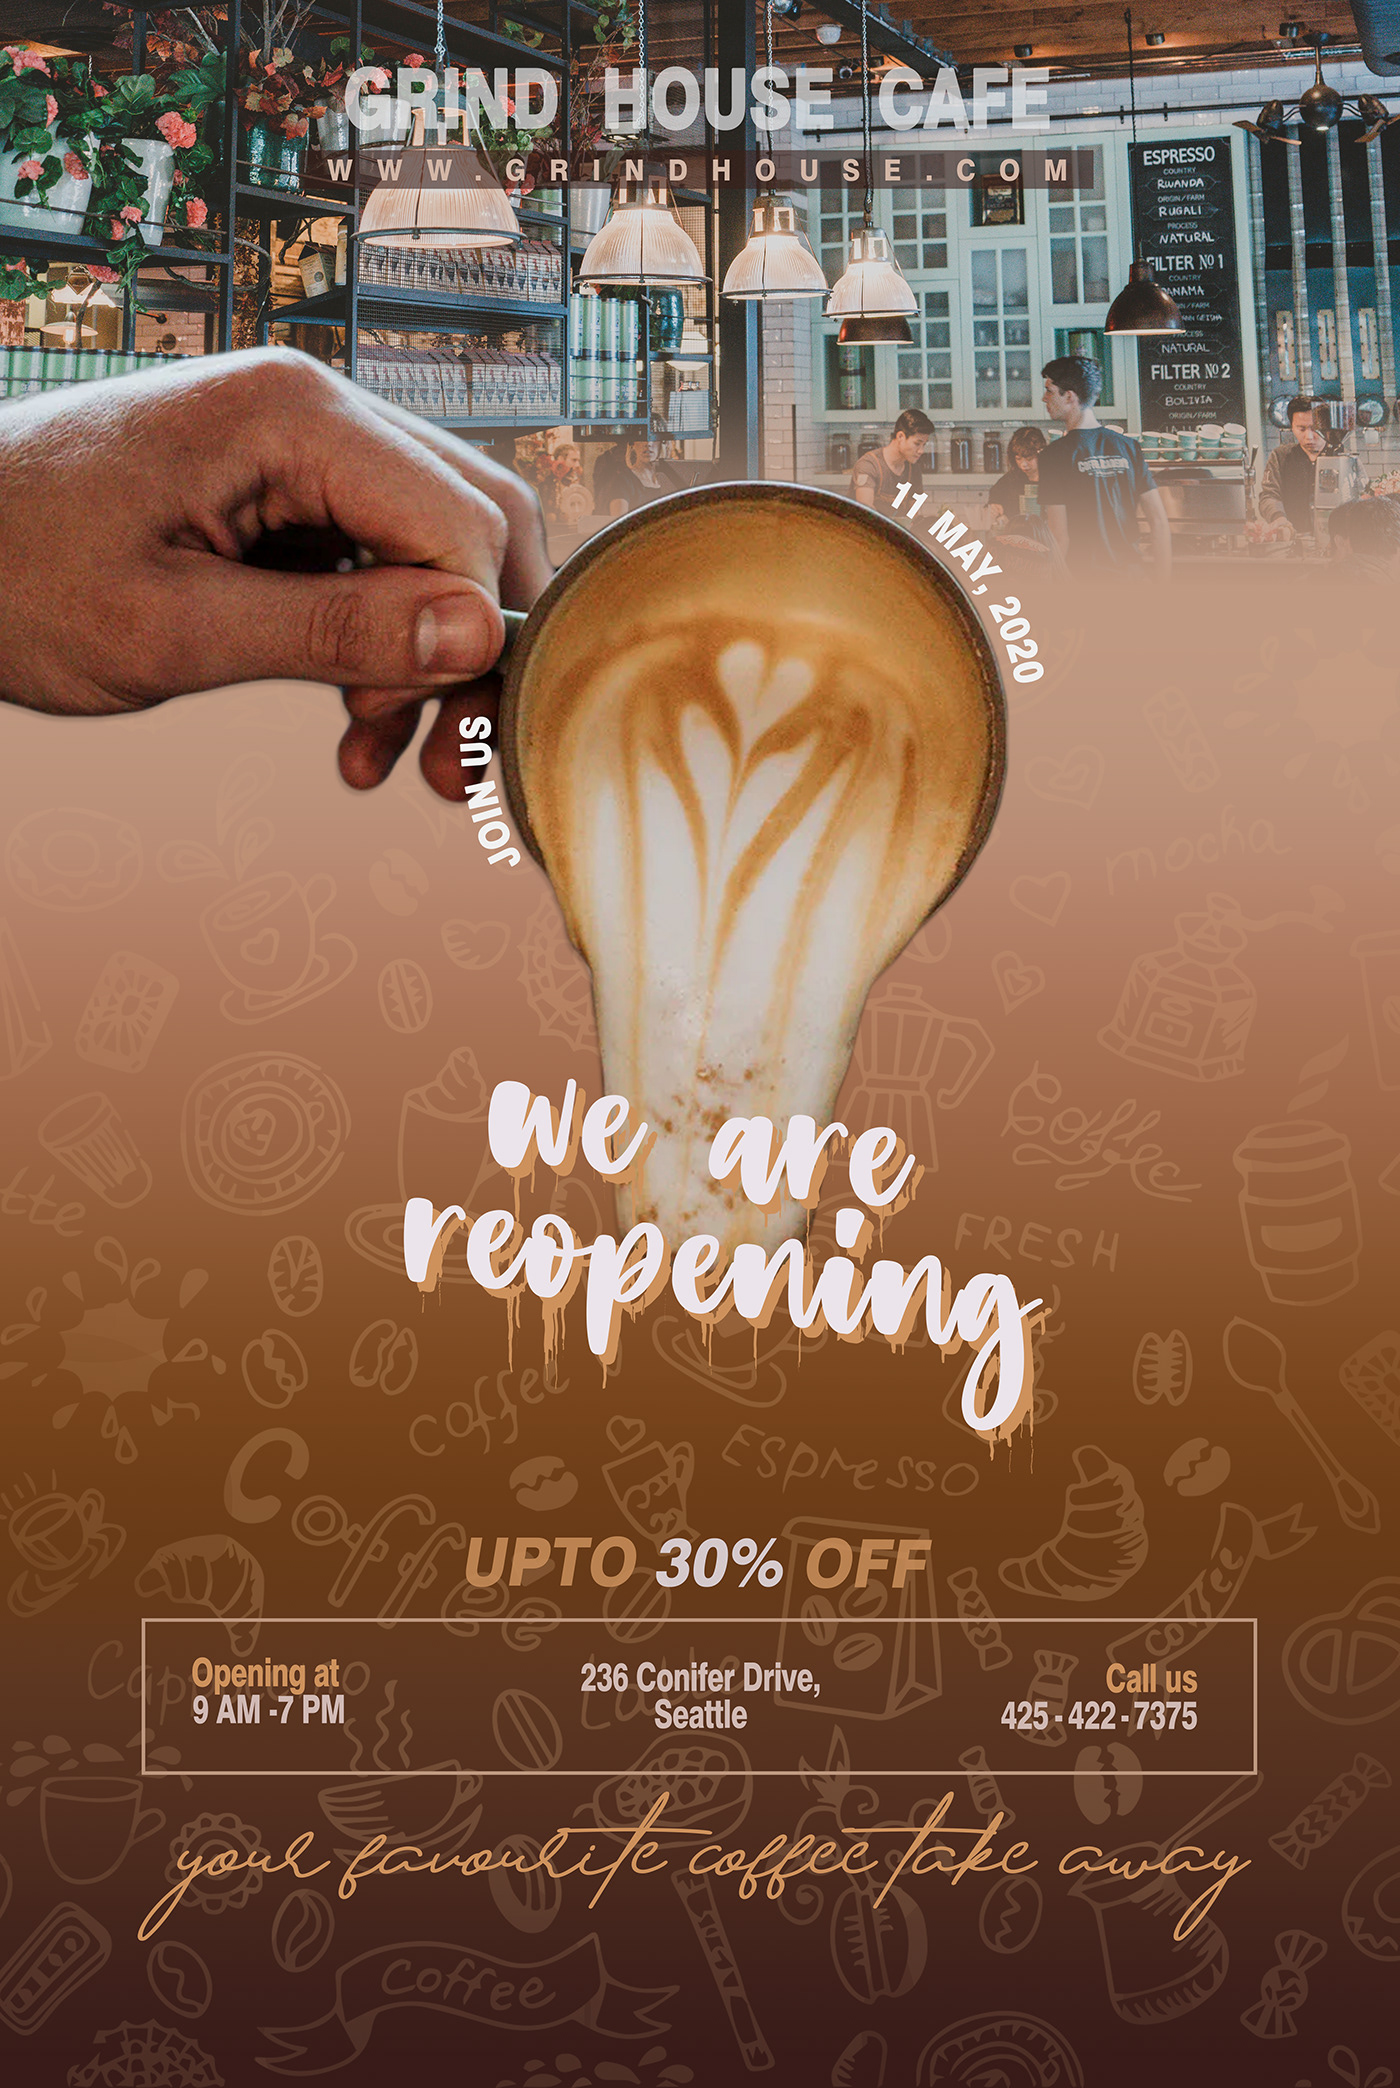 A cafe reopening poster design where a person pours a steaming cup of coffee against cafe backdrop.